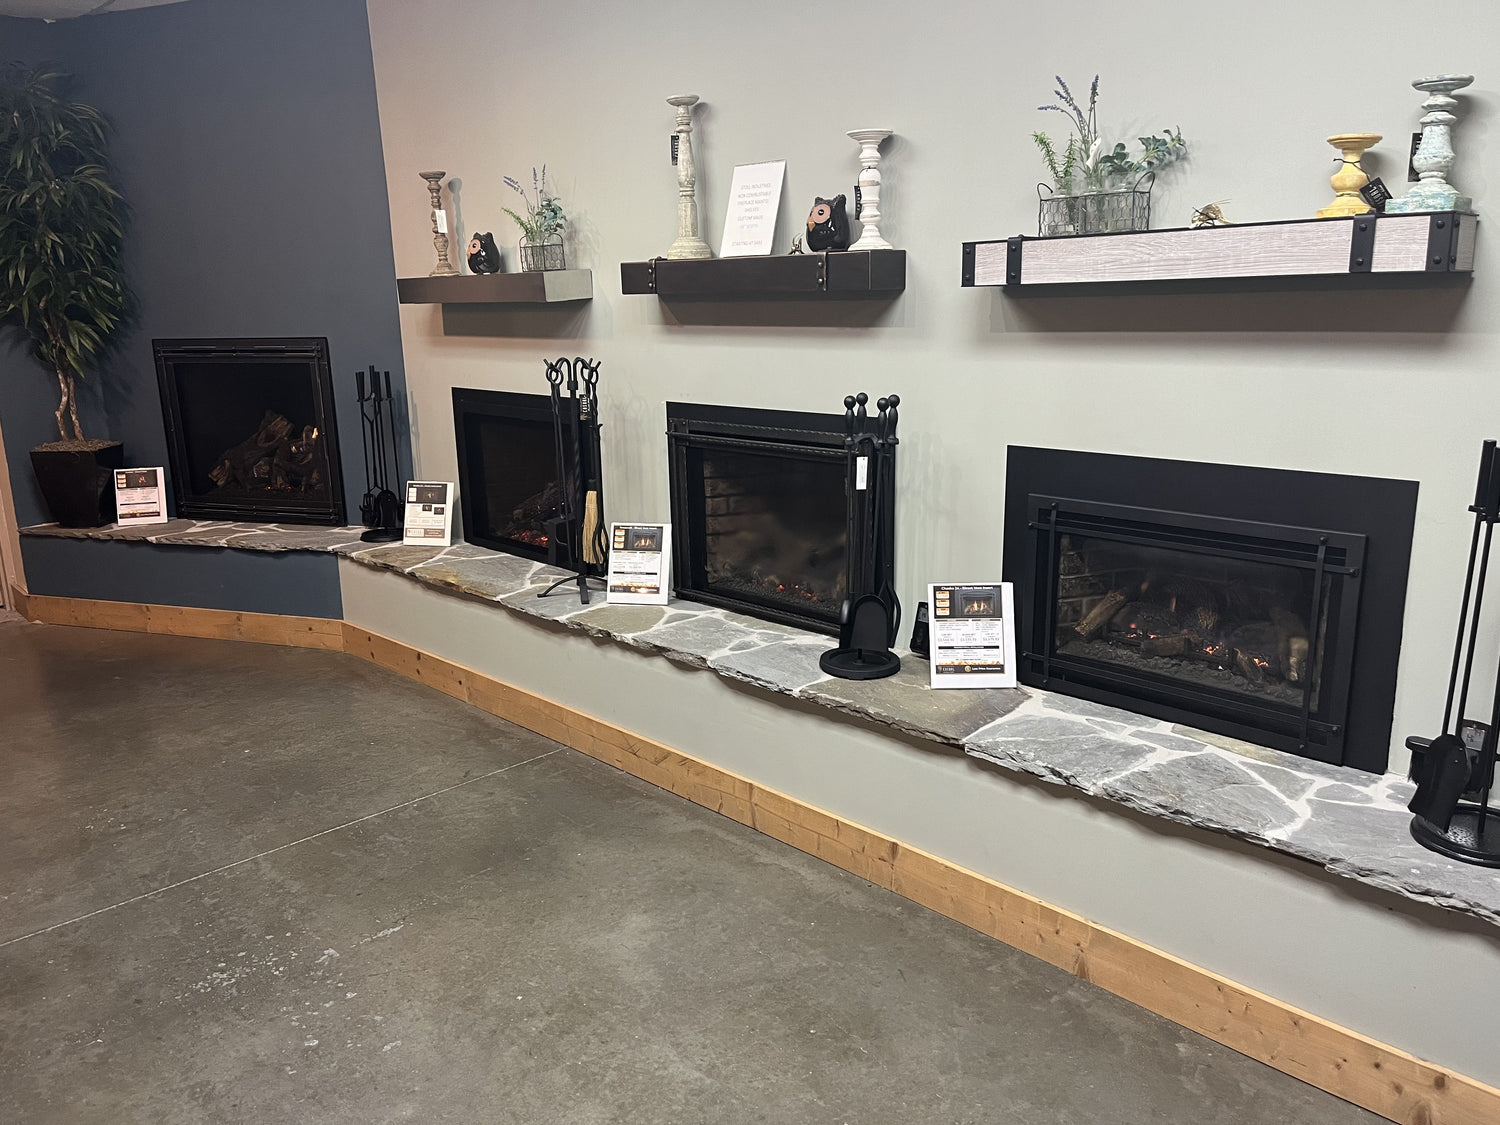 Greensboro, NC - Gas Logs, Fireplaces and Wood Stoves